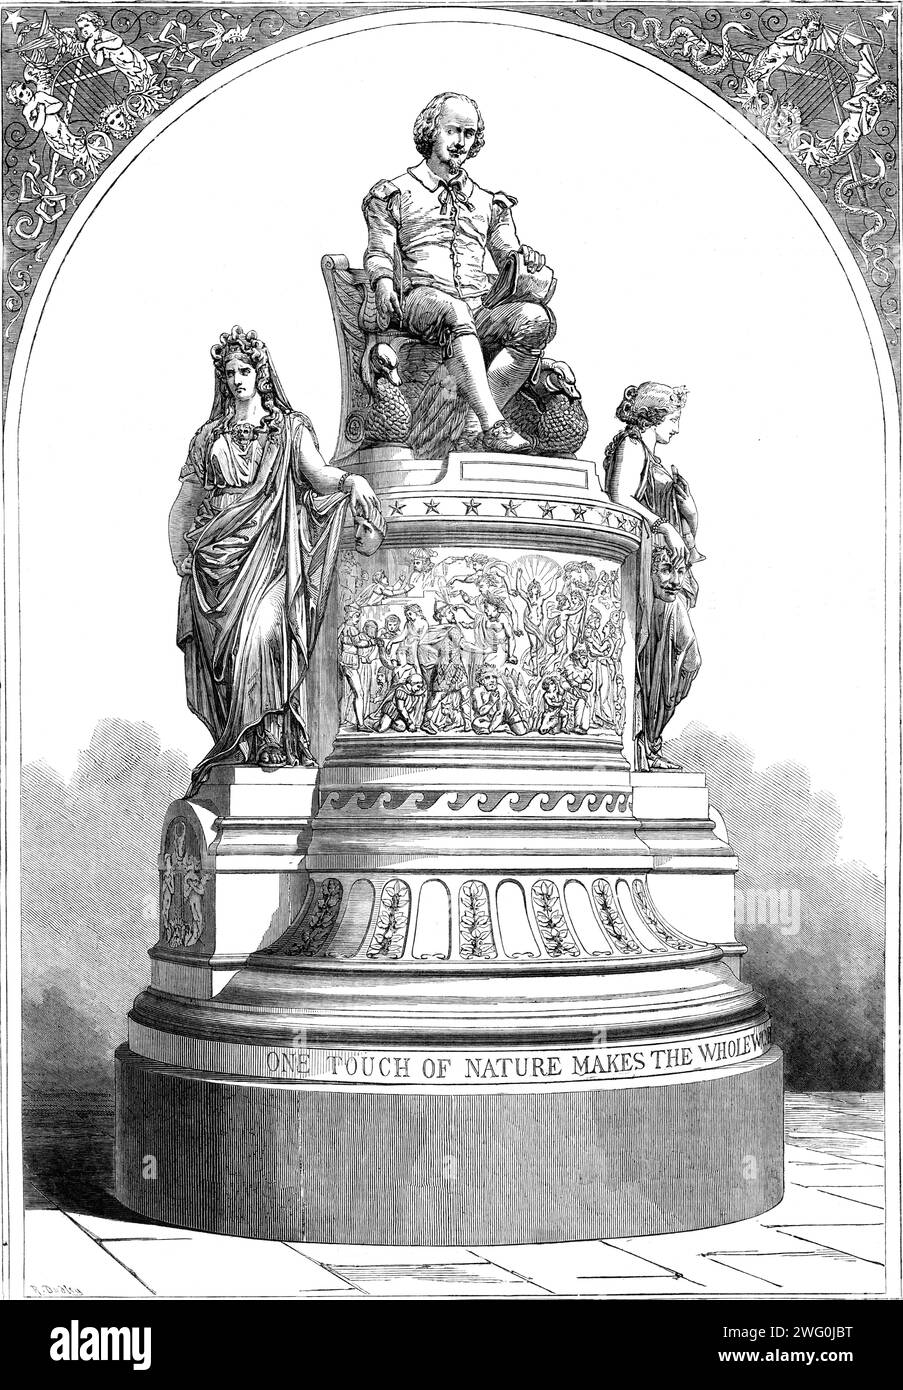 Plaster Monument of Shakspeare, modelled by the late J. E. Thomas, 1862. 'It was designed not merely as a portrait-statue, but as a national monument...the poet is elevated on a lofty and massive pedestal decorated with bas-reliefs, and there are...two lateral allegorical figures of Comedy and Tragedy...The great poet holds a pen in one hand and loose manuscript in the other...Great praise, however, is also due to the sculptor for...the felicitous composition, and the careful modelling of the principal characters, male and female, of Shakspeare's plays in the gilt bas-reliefs which decorate th Stock Photo